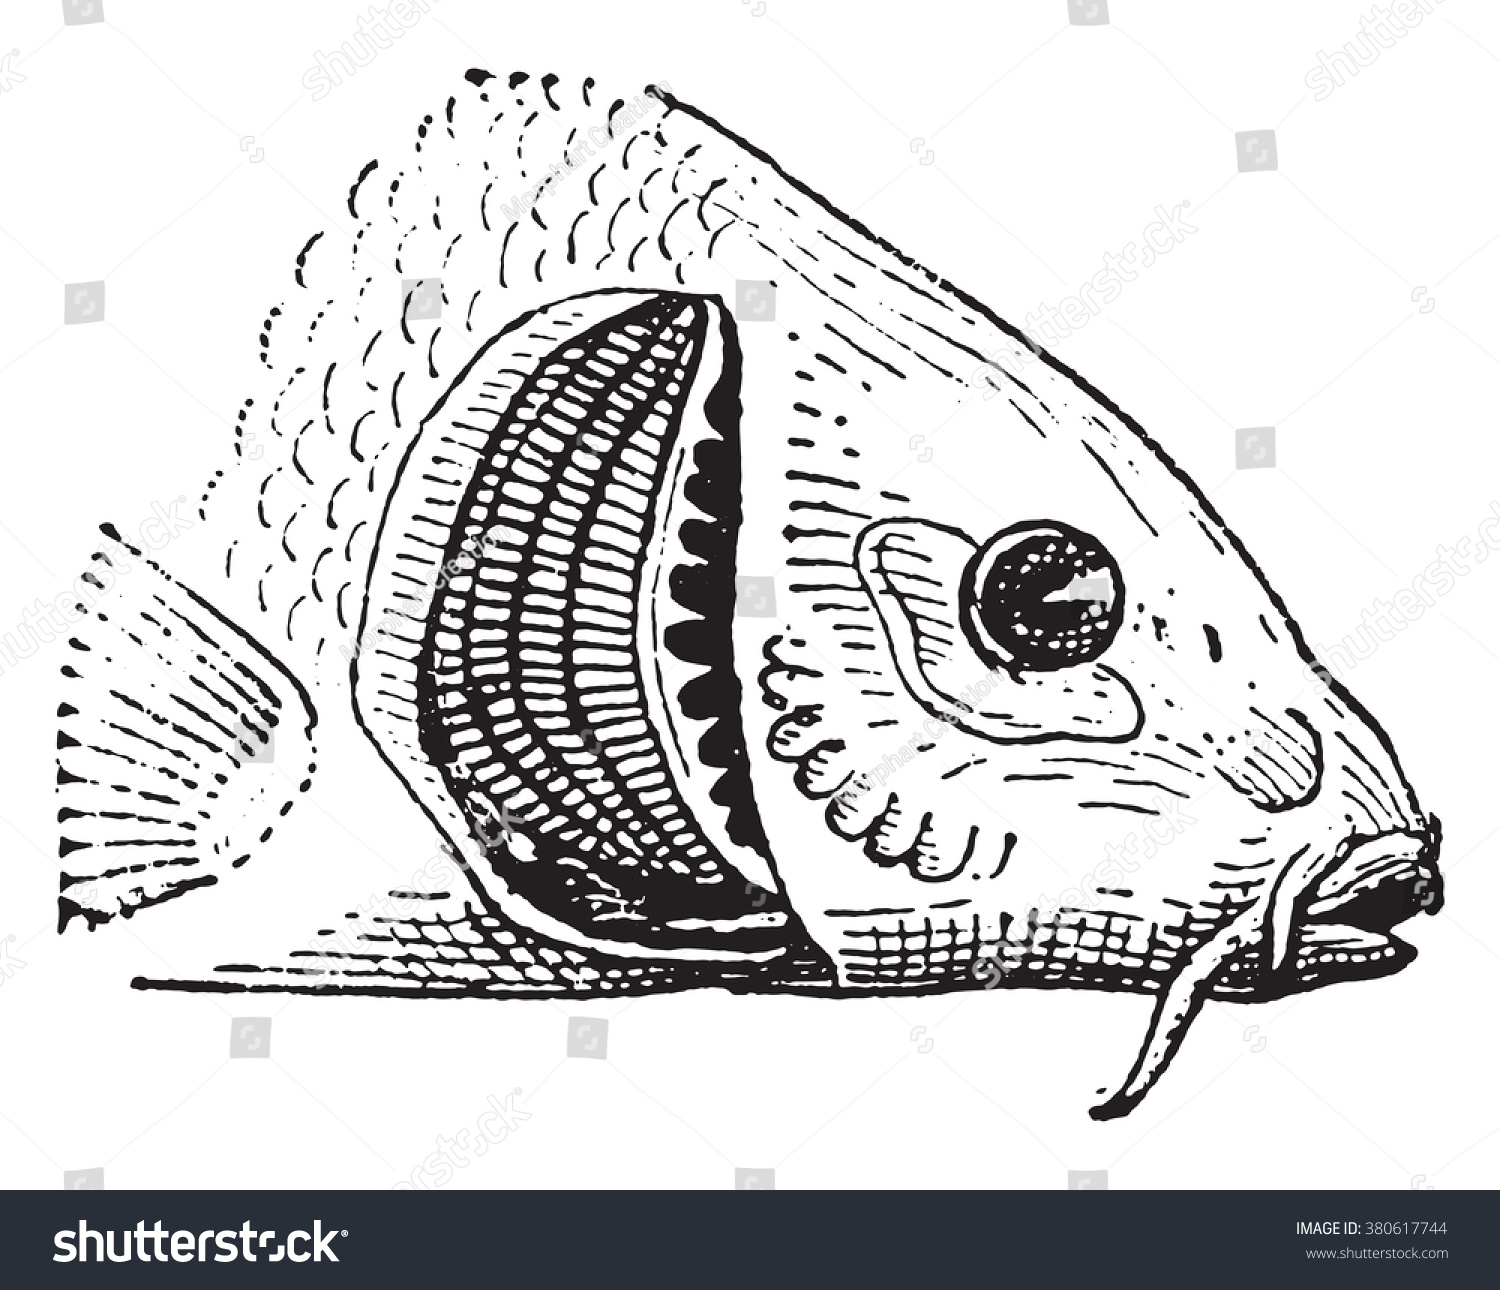 Download Fish Gill Vintage Engraved Illustration Dictionary Stock Vector (Royalty Free) 380617744 ...